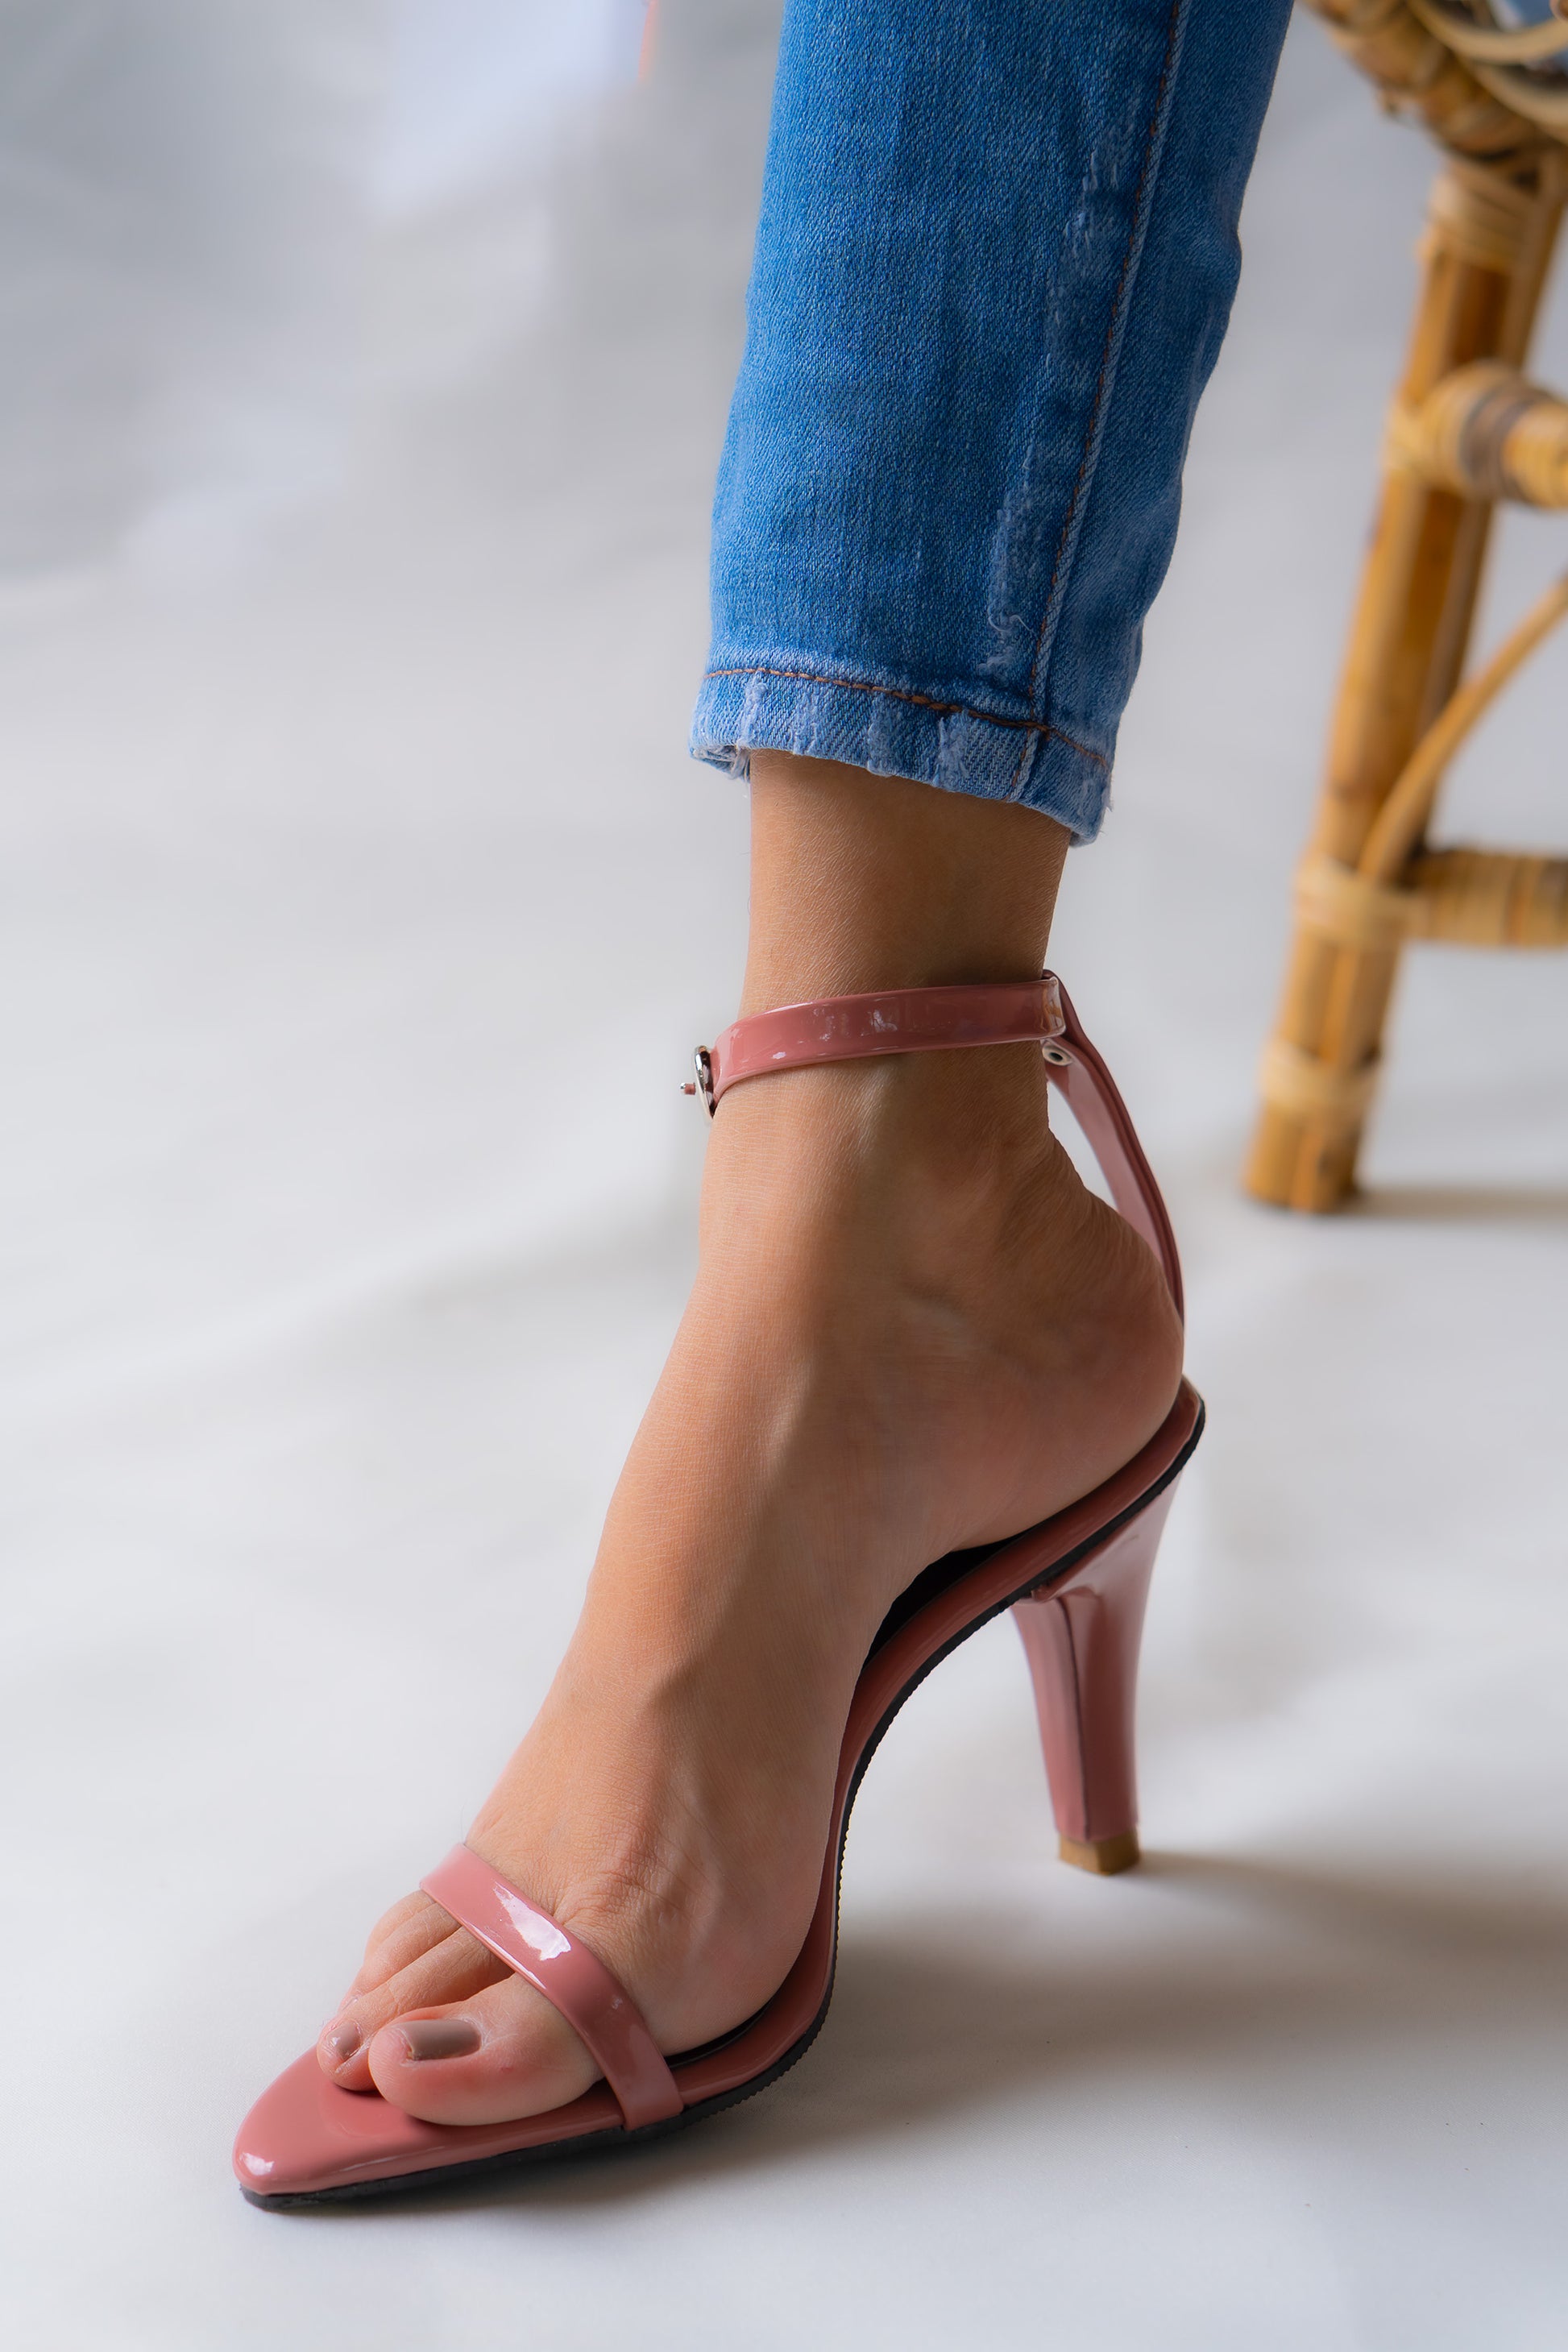 Beautiful rose pink heel elevated with a 3-inch heel